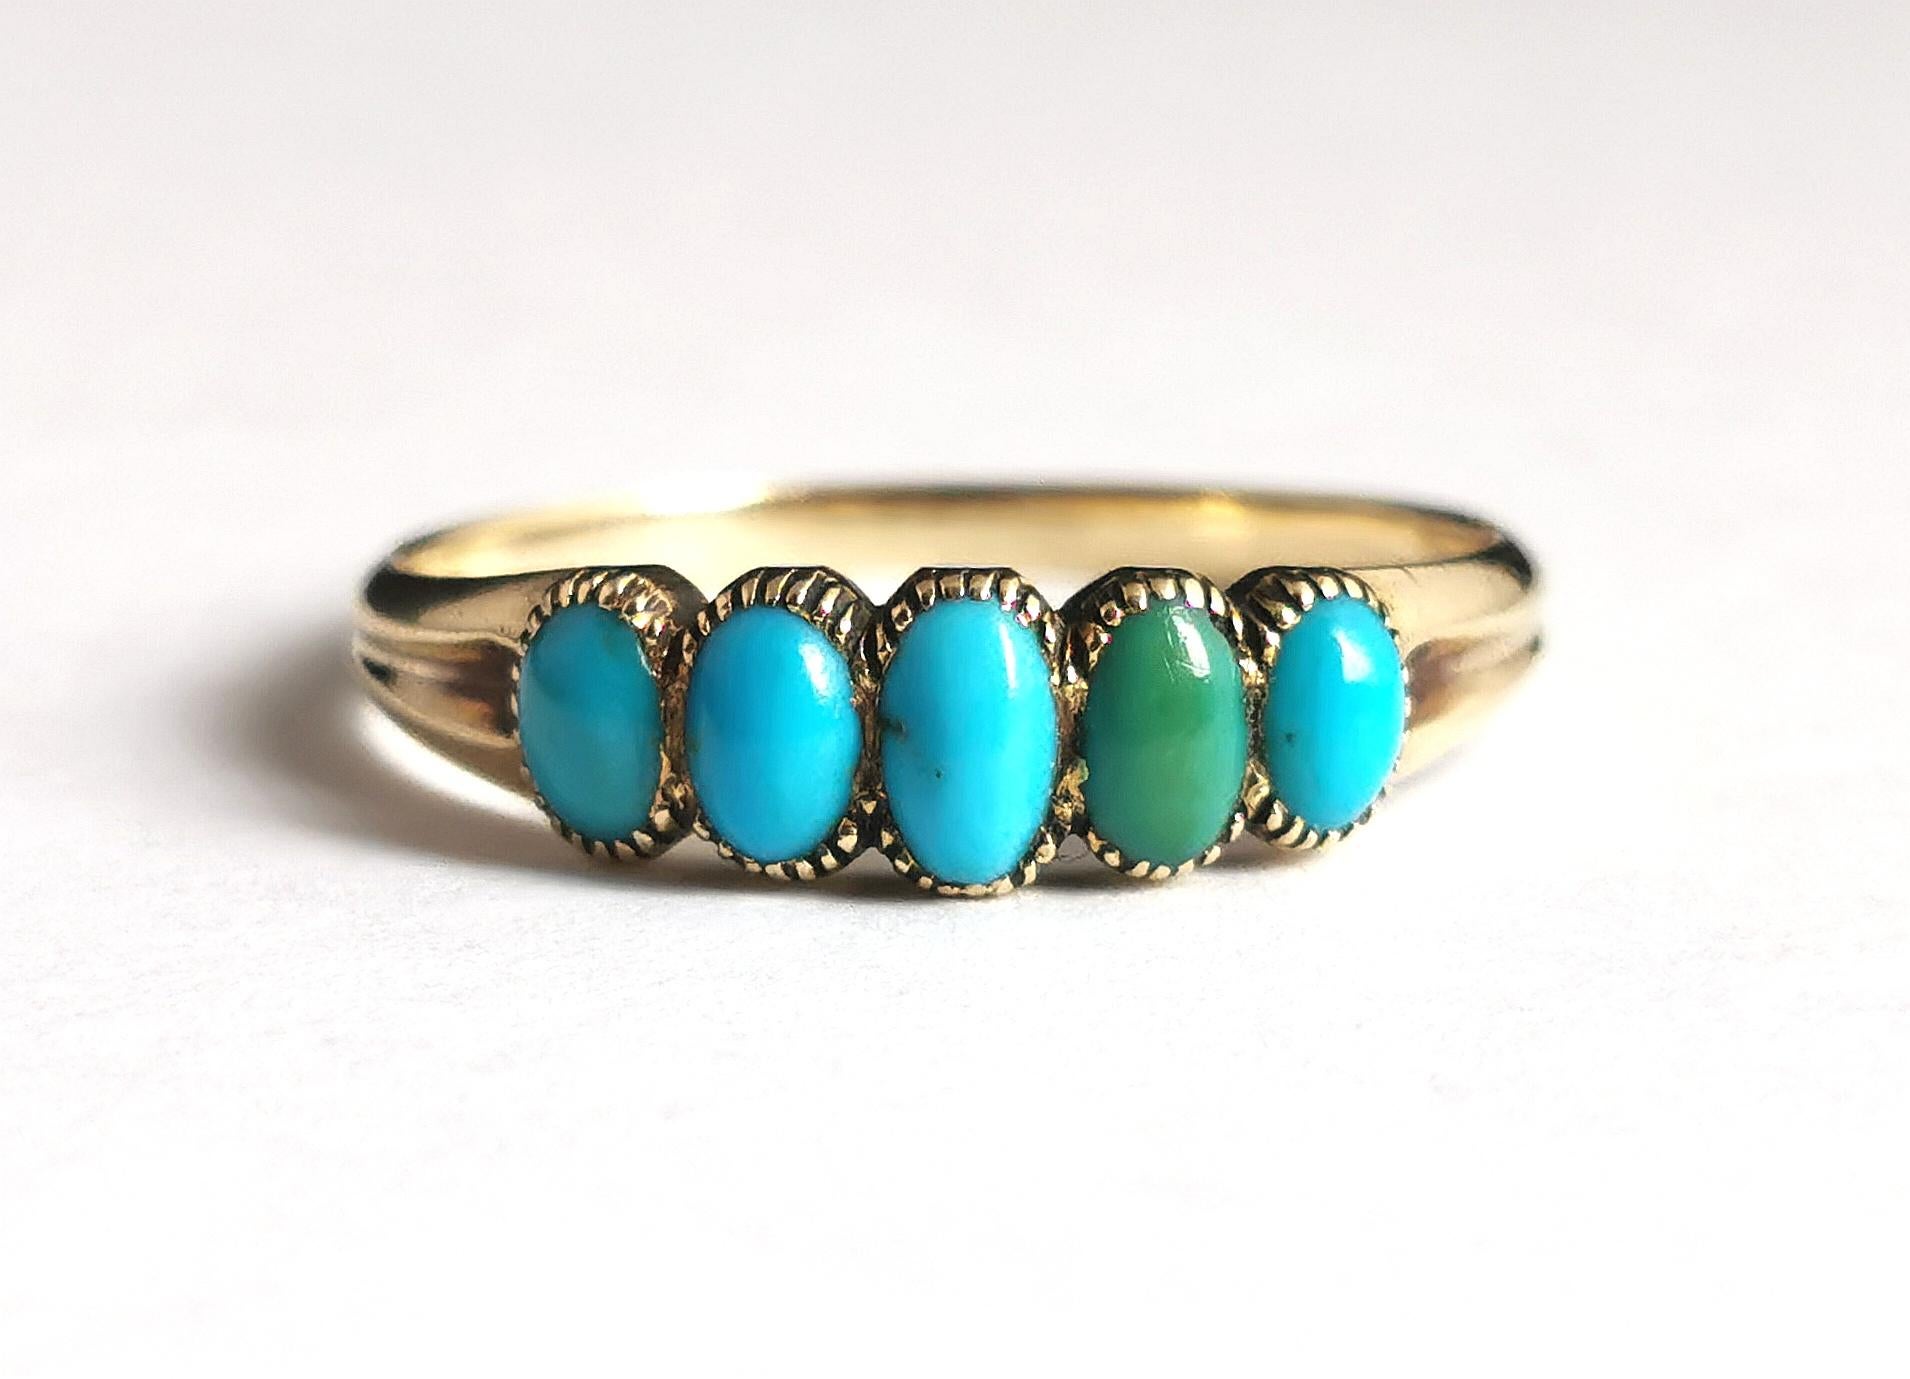 Antique Victorian Five Stone Turquoise Ring, 18k Yellow Gold 9